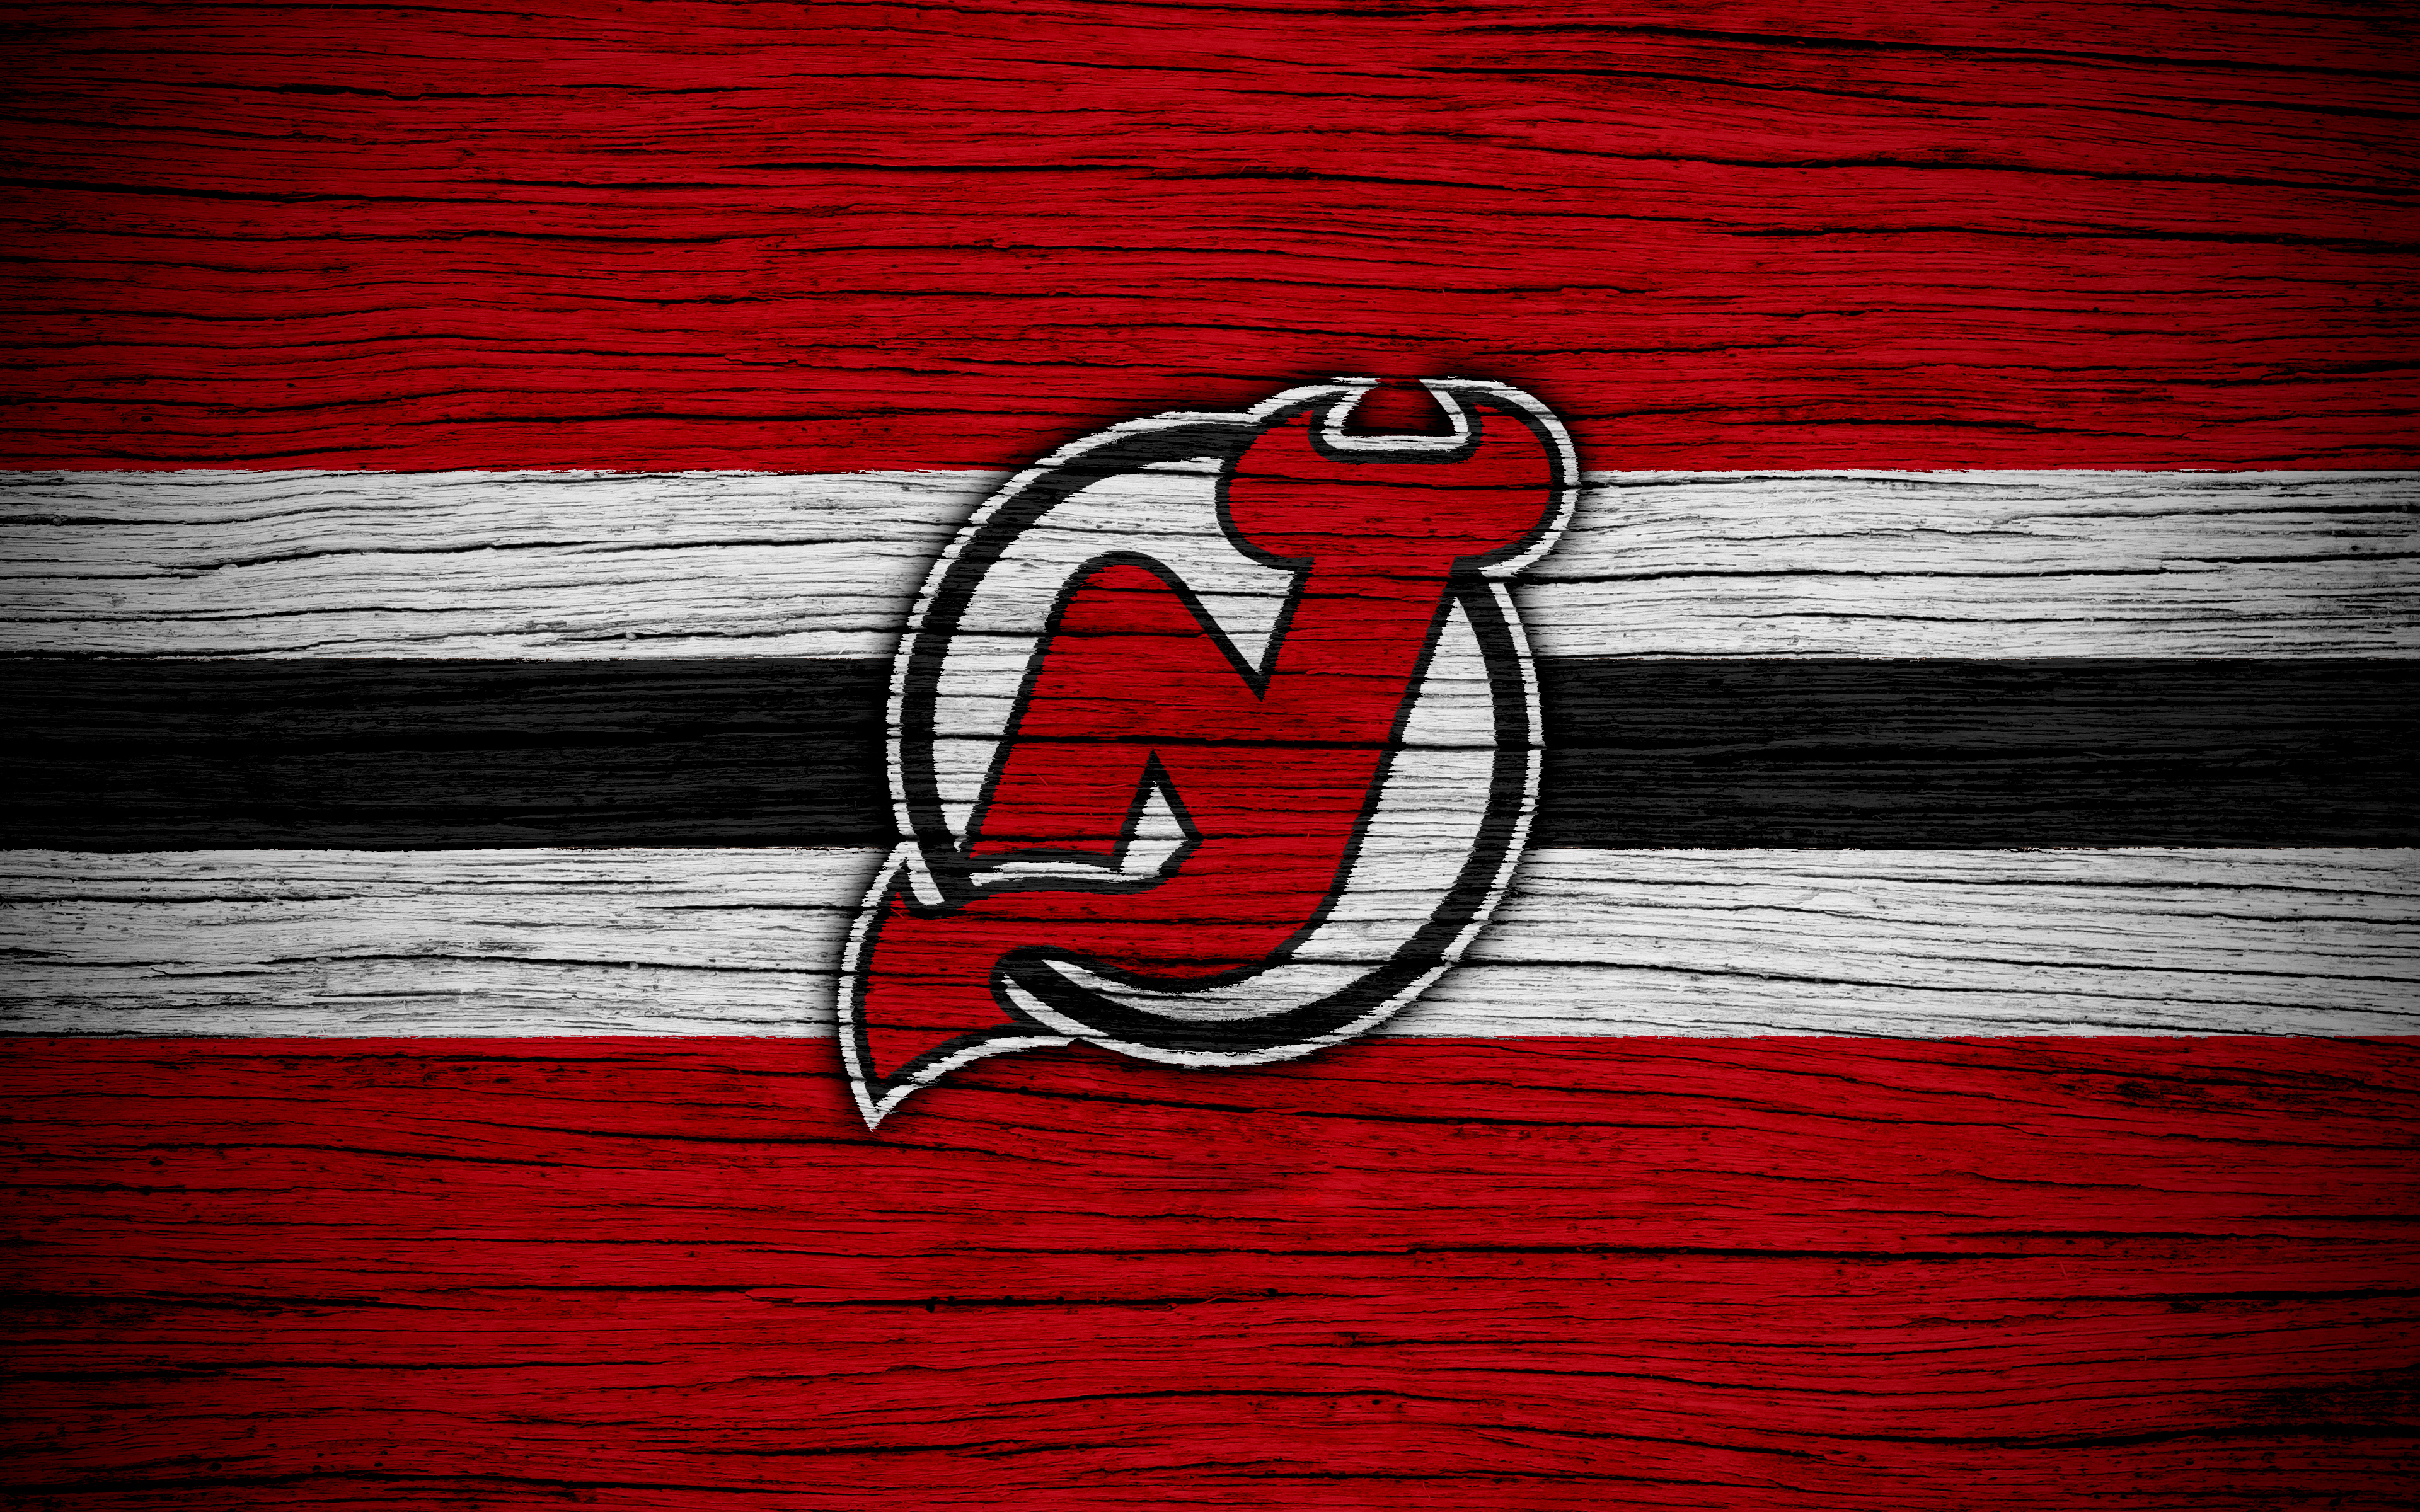 New Jersey Devils on X: These are some legendary wallpapers